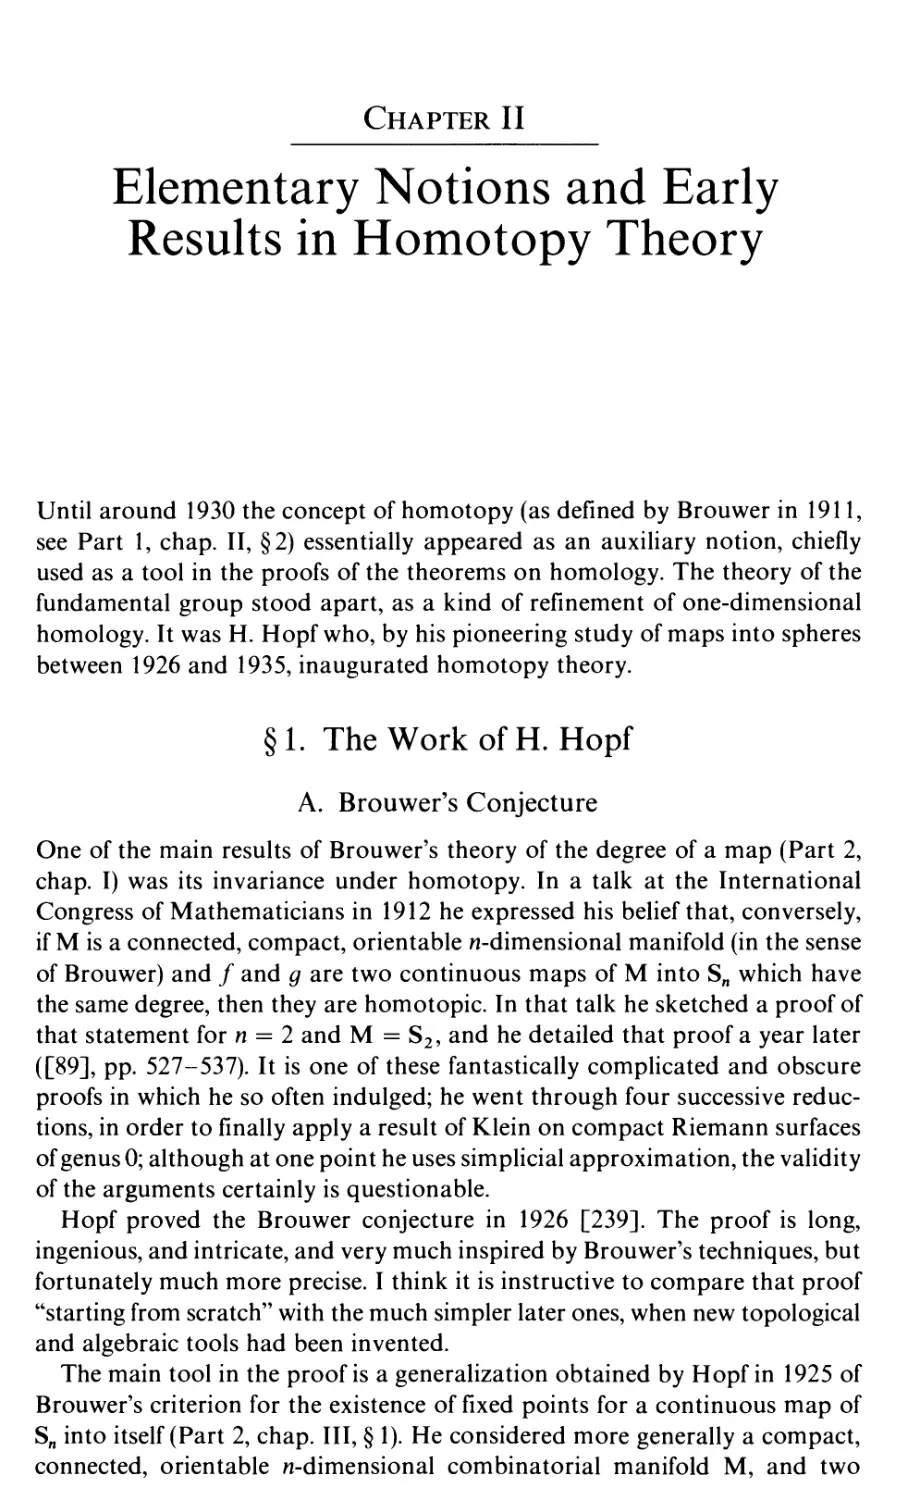 Chapter II. Elementary Notions and Early Results in Homotopy Theory